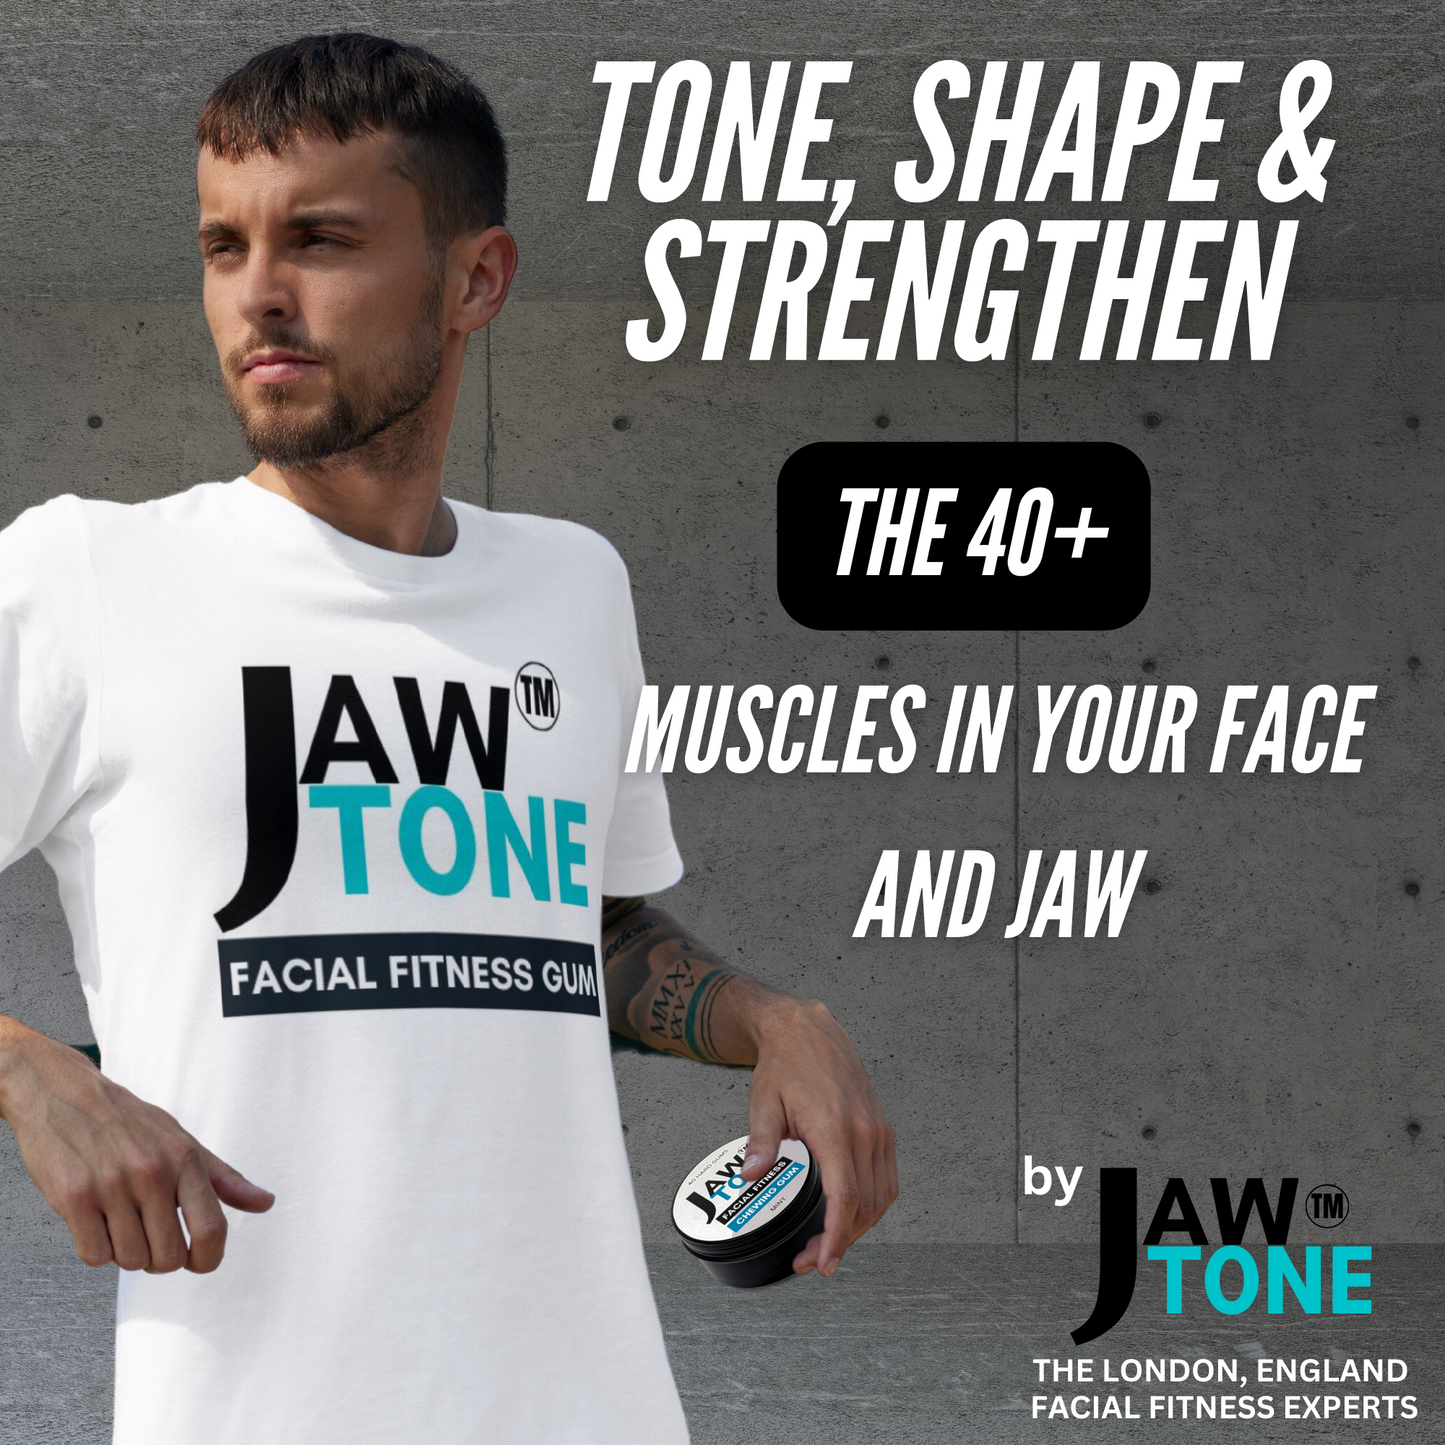 JawTone™ - 12X HARD GUM (6 month saver supply) mint formulated for Jawline and Facial Fitness - mastic style gum VEGAN Xylitol Sweetened